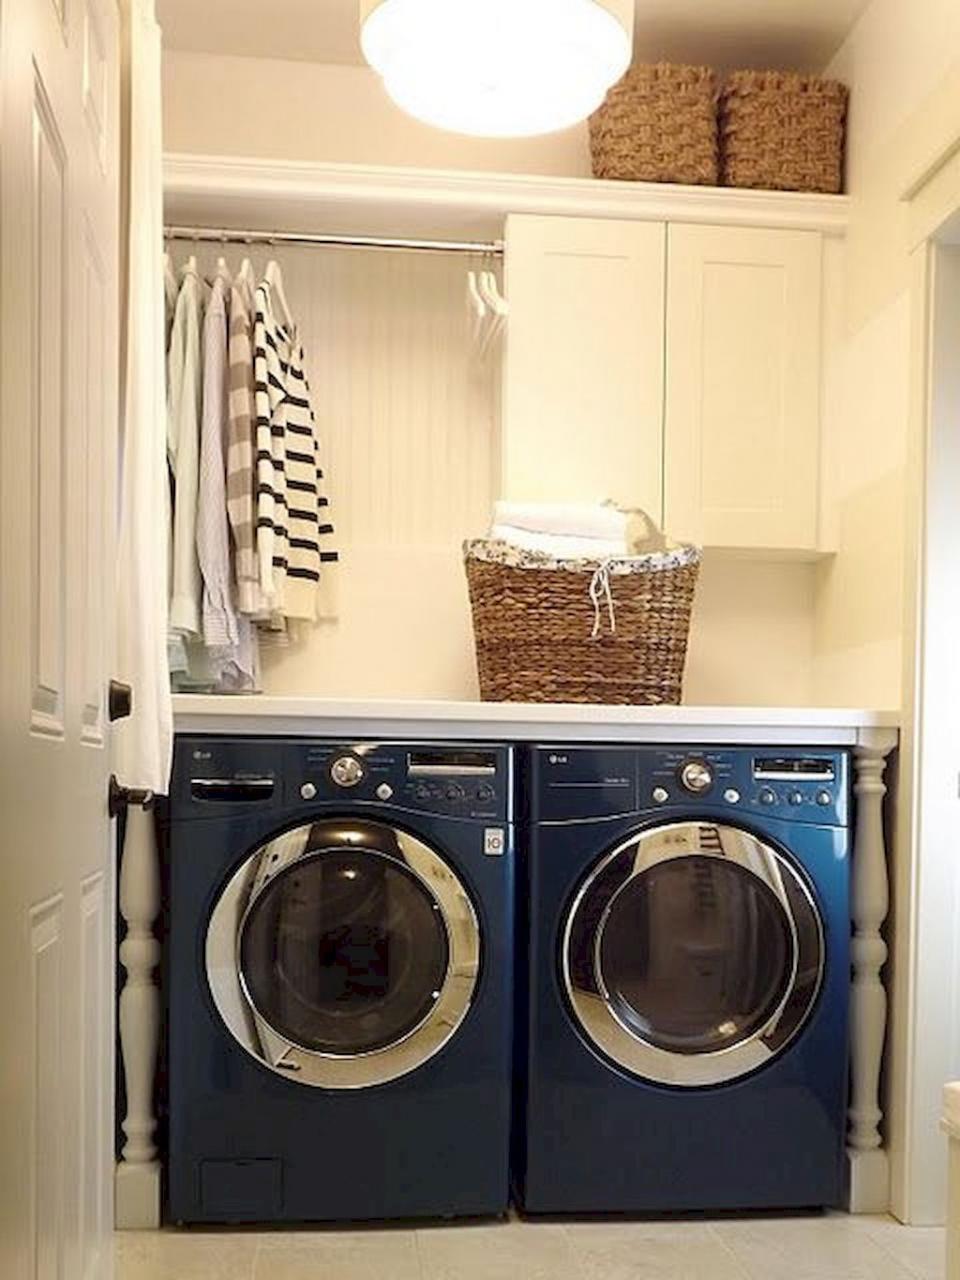 50 Cool Small Laundry Room Design Ideas (With images) Laundry closet